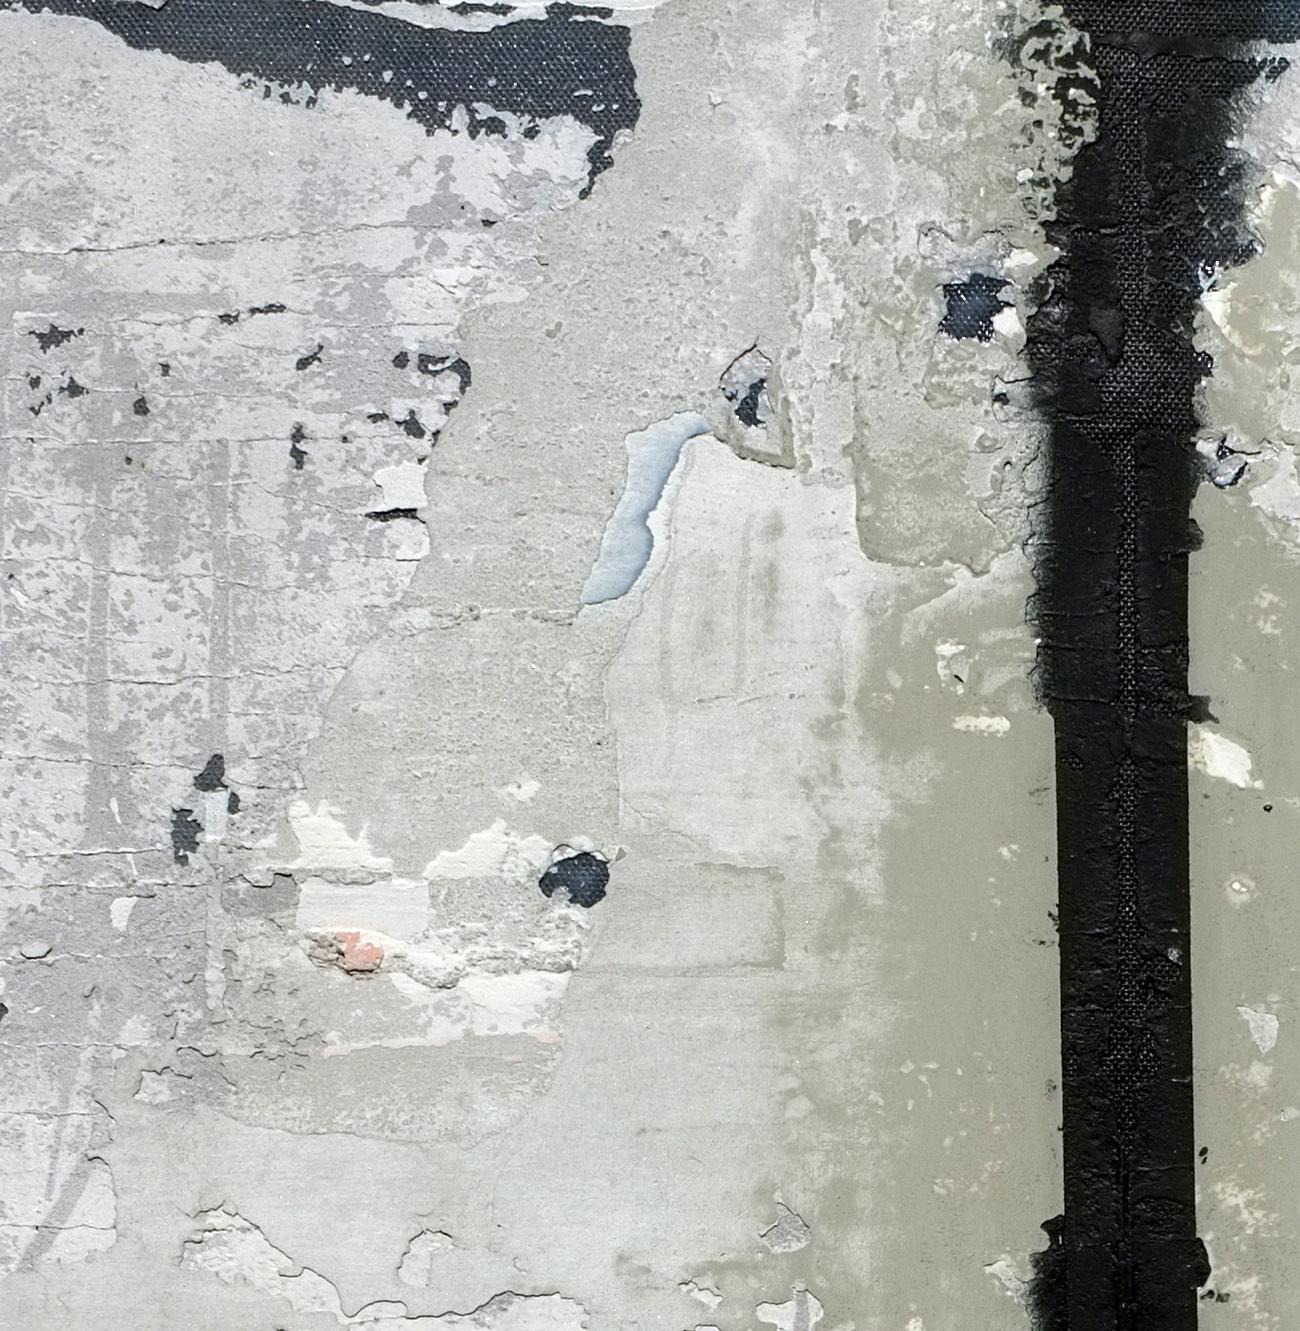 'D-street' is a minimalist abstract mixed media painting by French artist - Antoine Puisais. It is a medium size grey and black contemporary collage on linen canvas with a neutral design and authentic, raw aesthetic. Its beautiful monochromatic